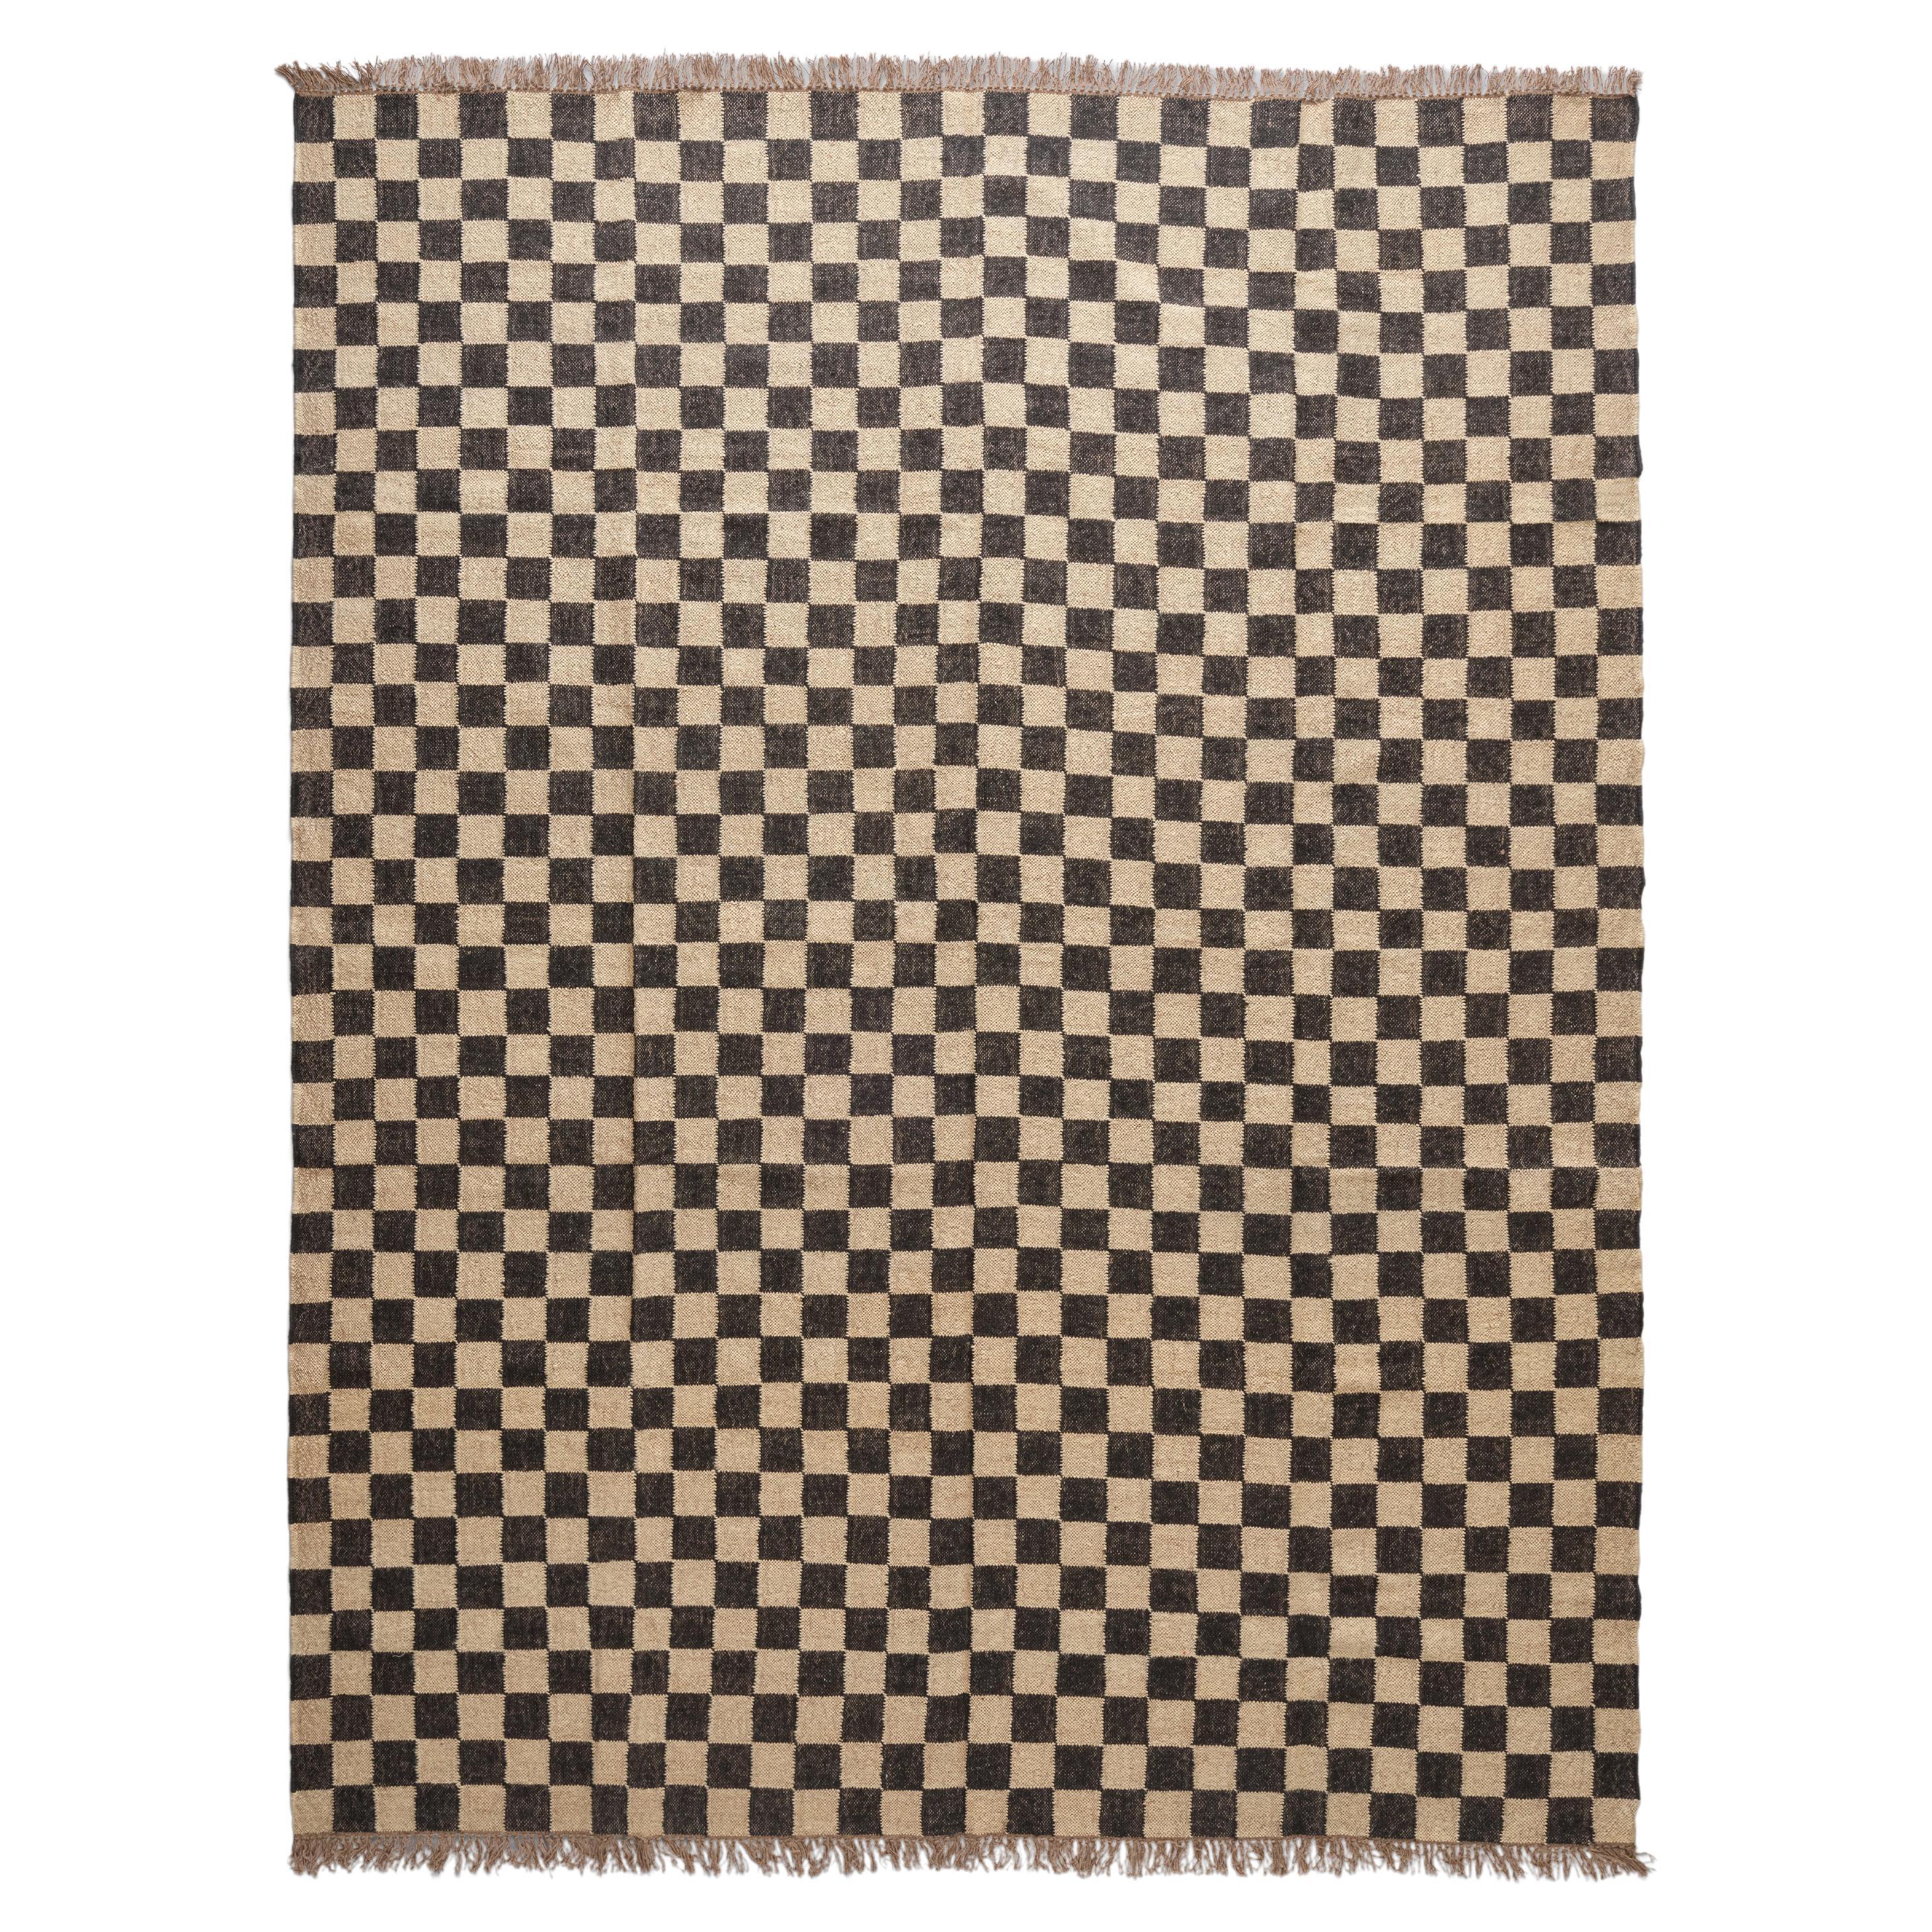 The Forsyth Checkerboard Rug - Off Black, 3x5 For Sale